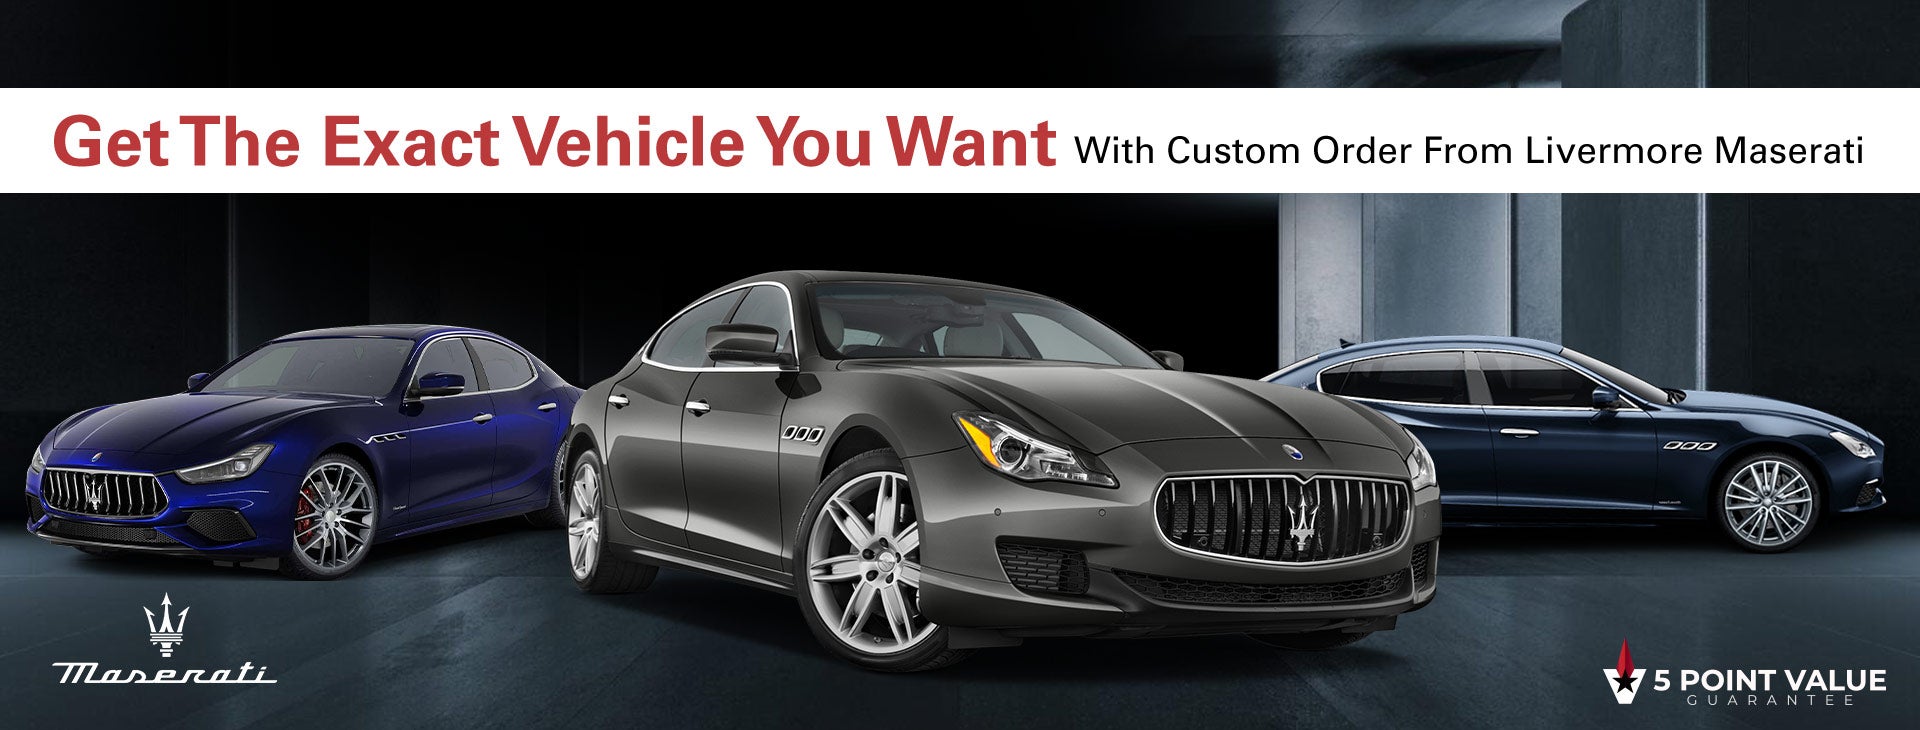 Get The vehicle you want | Livermore Maserati in Livermore CA